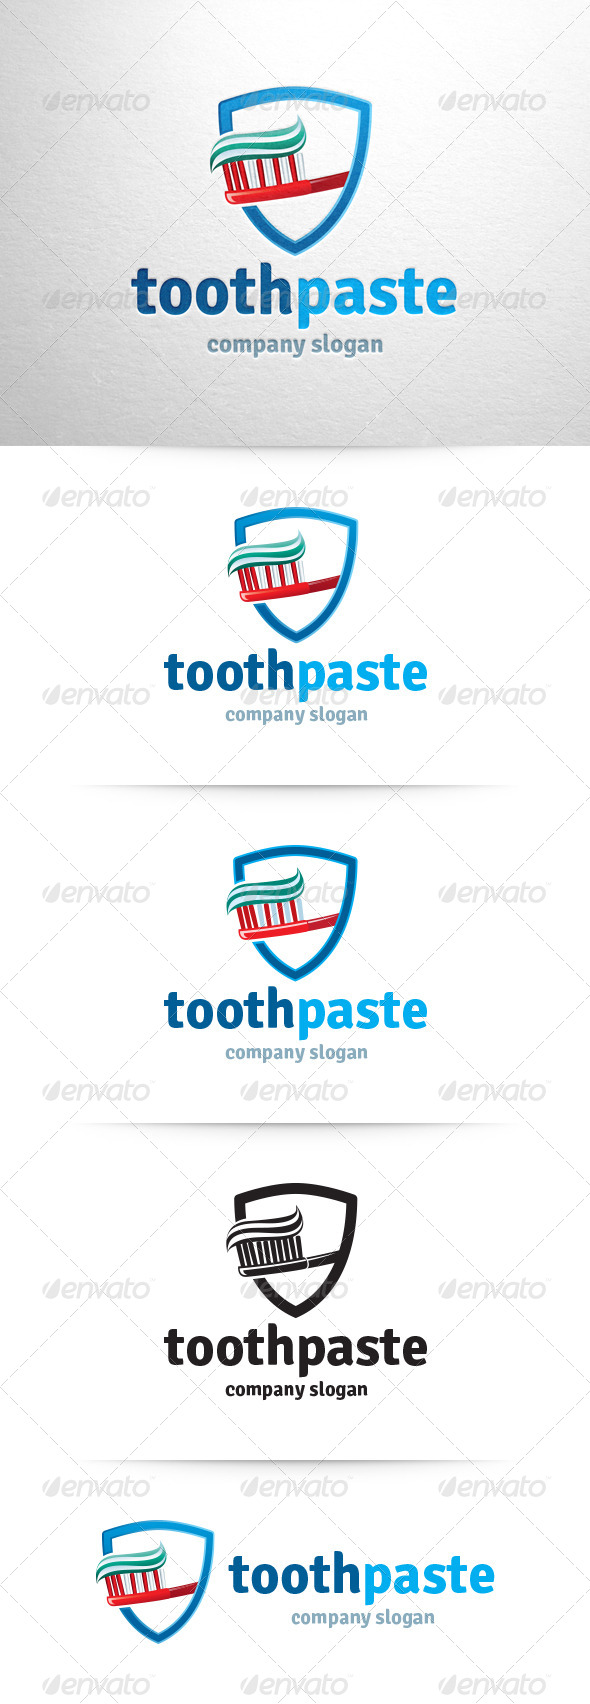 Toothpaste Two Font Logos